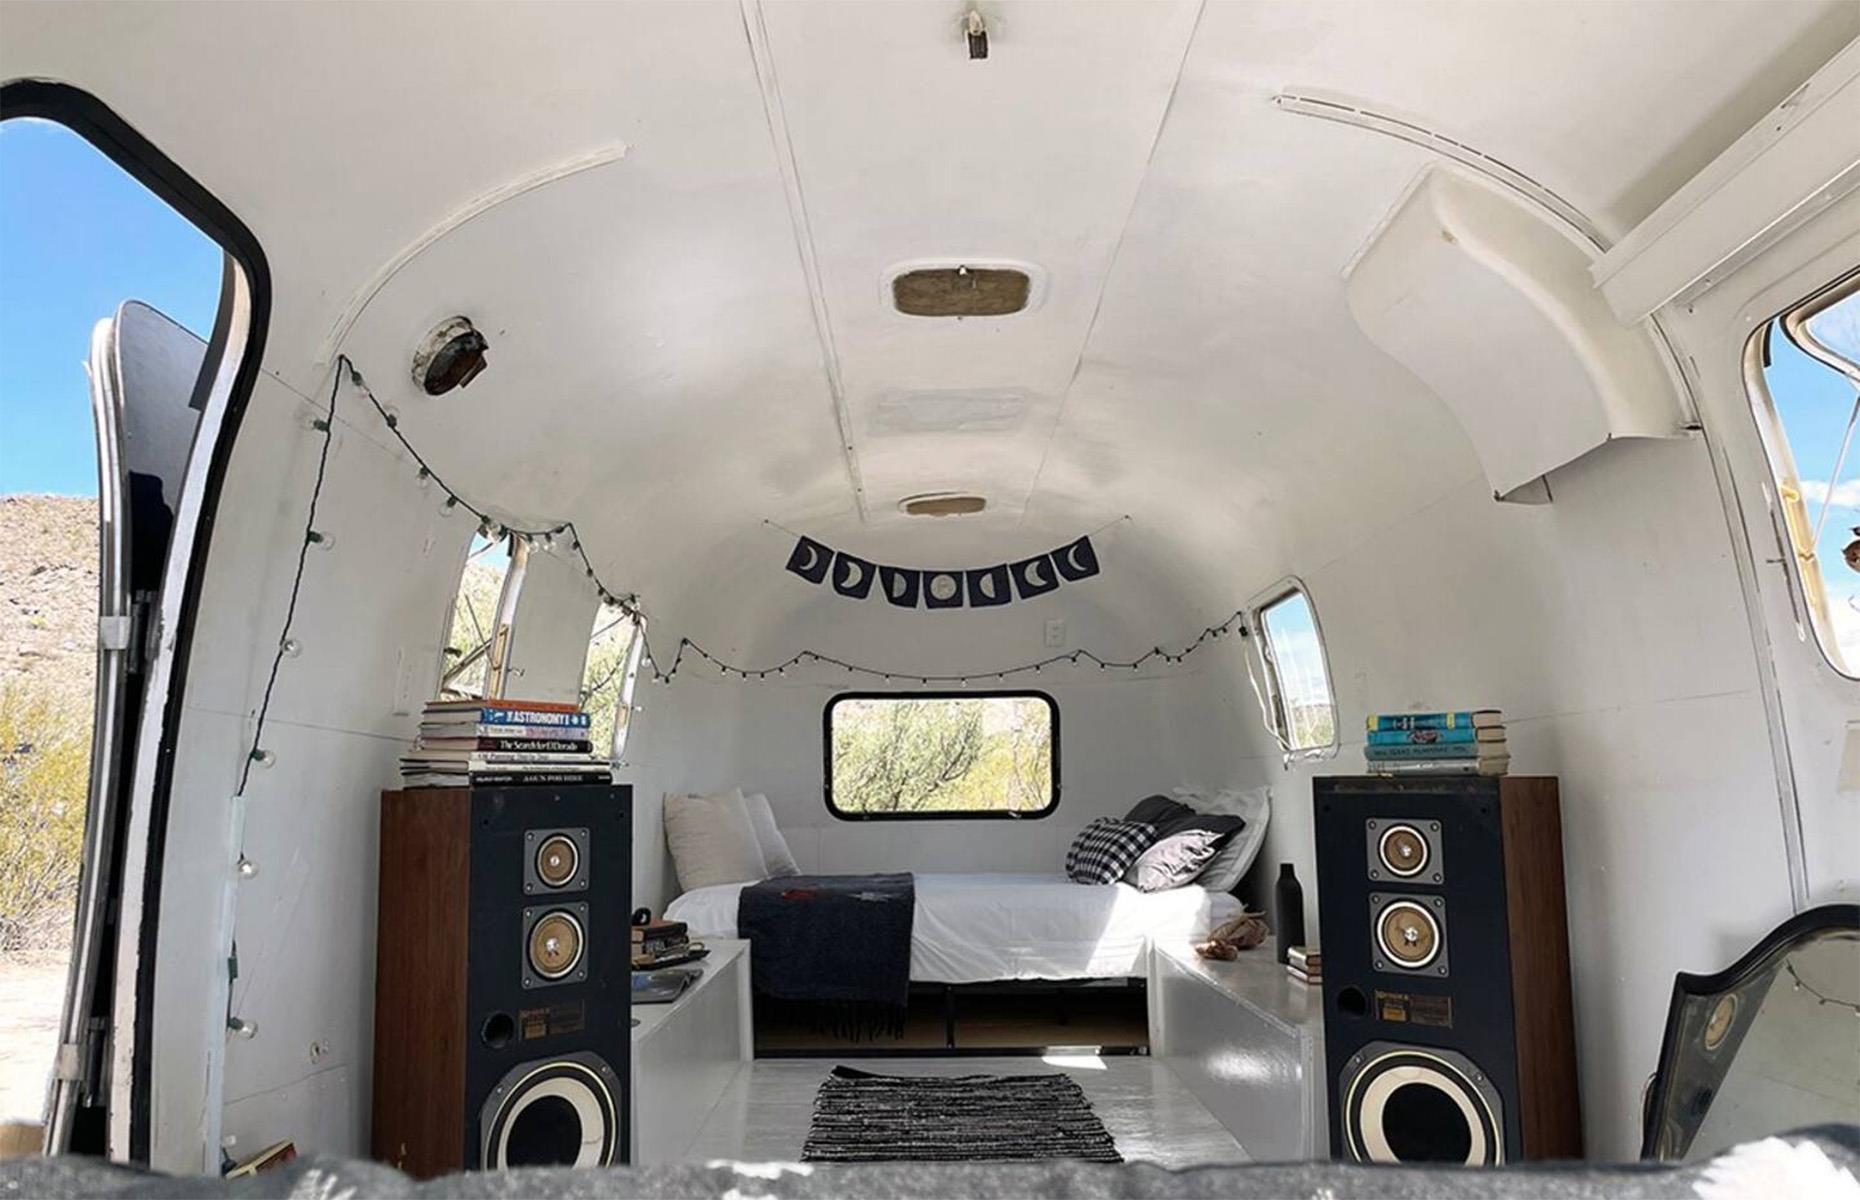 <p>The Airstream itself is a travel trailer dating from the late 1960s, which has been entirely remodelled to include a stylish, minimalistic interior with a queen-size bed and convertible sofa.</p>  <p>The <a href="https://www.airbnb.co.uk/rooms/42075286">Airbnb listing</a> states that there's no Wi-Fi at the site, meaning that this unique retreat offers the perfect opportunity to disconnect, soak up the natural surrounds and embrace a slower pace of life off the grid. </p>